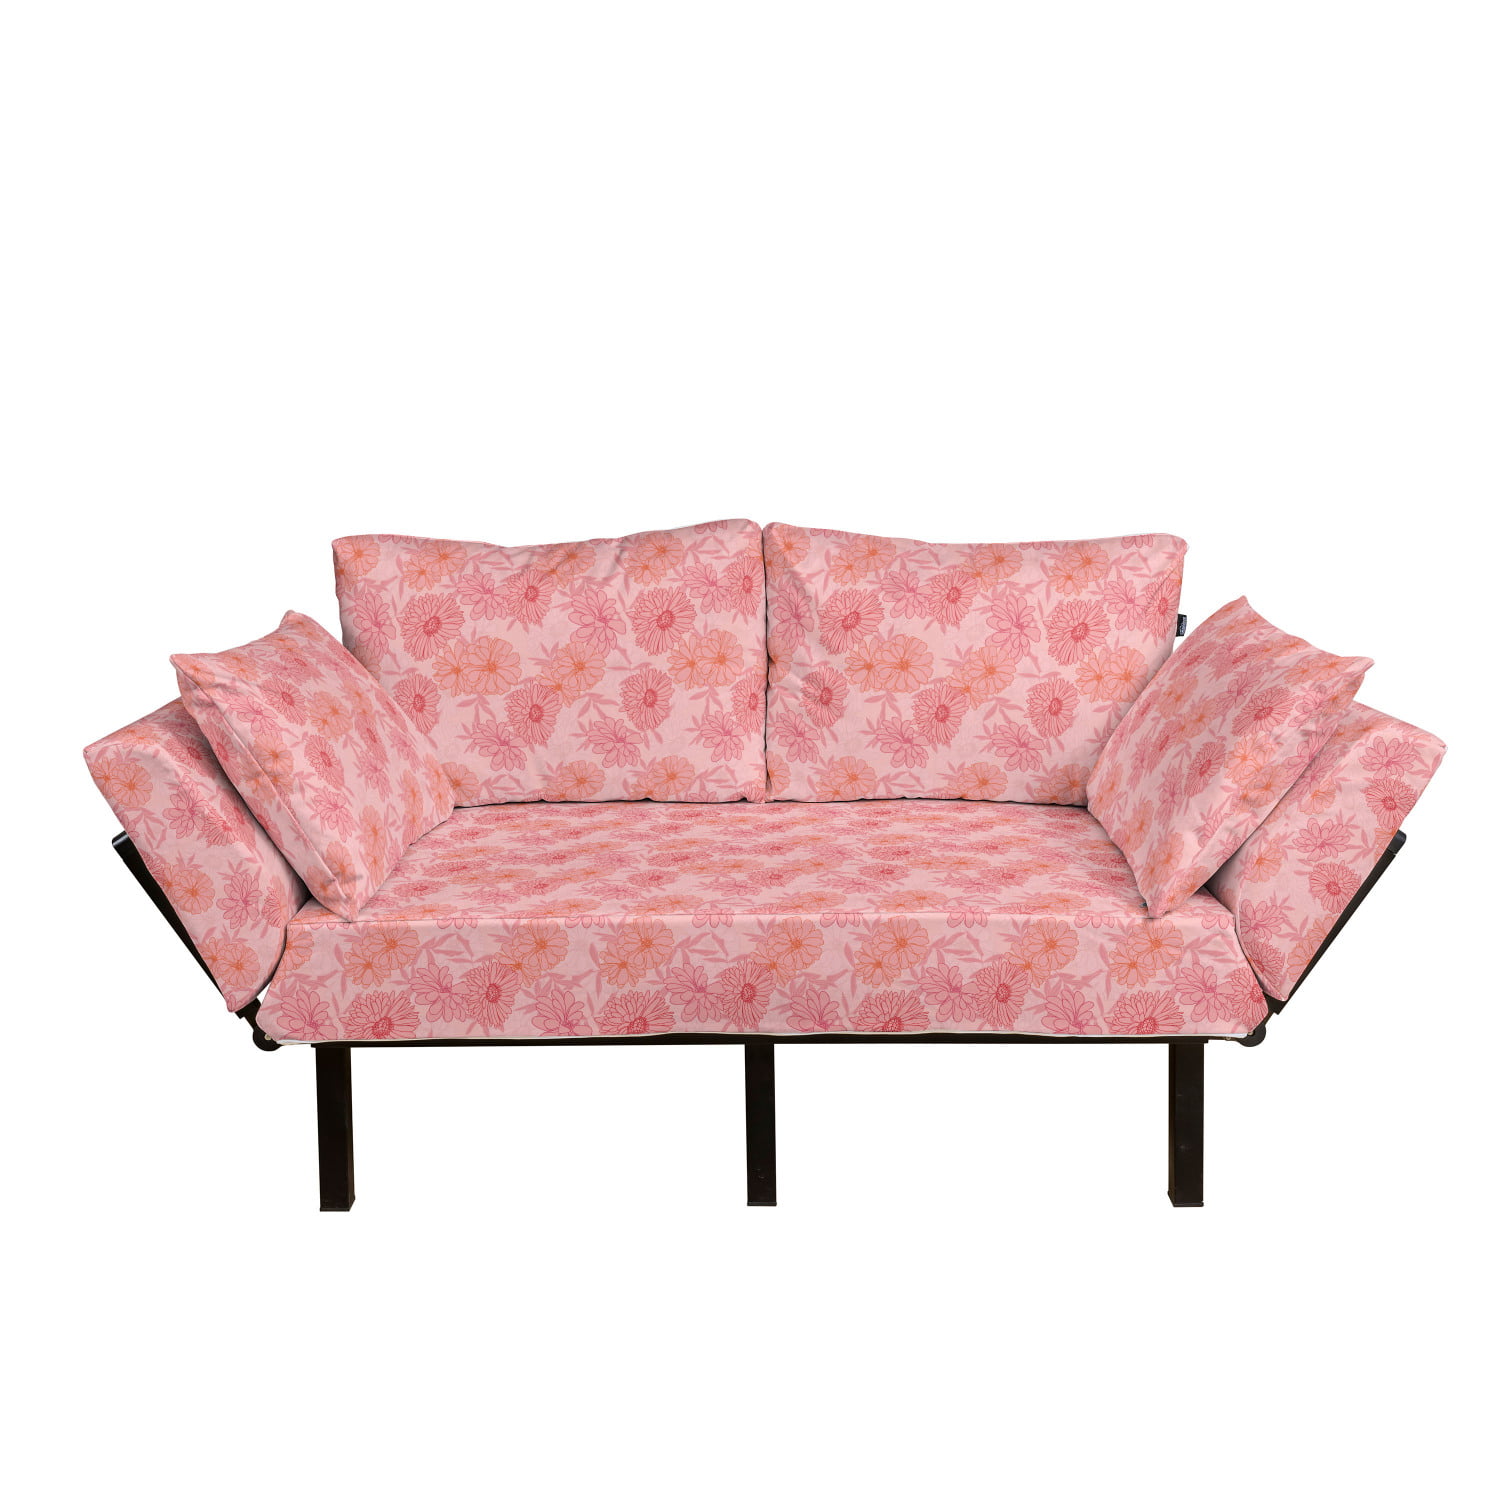 Loveseat Leaves and Flowers on an Ornate Background Ivory Coral Salmon Daybed with Metal Frame Upholstered Sofa for Living Dorm Ambesonne Floral Futon Couch